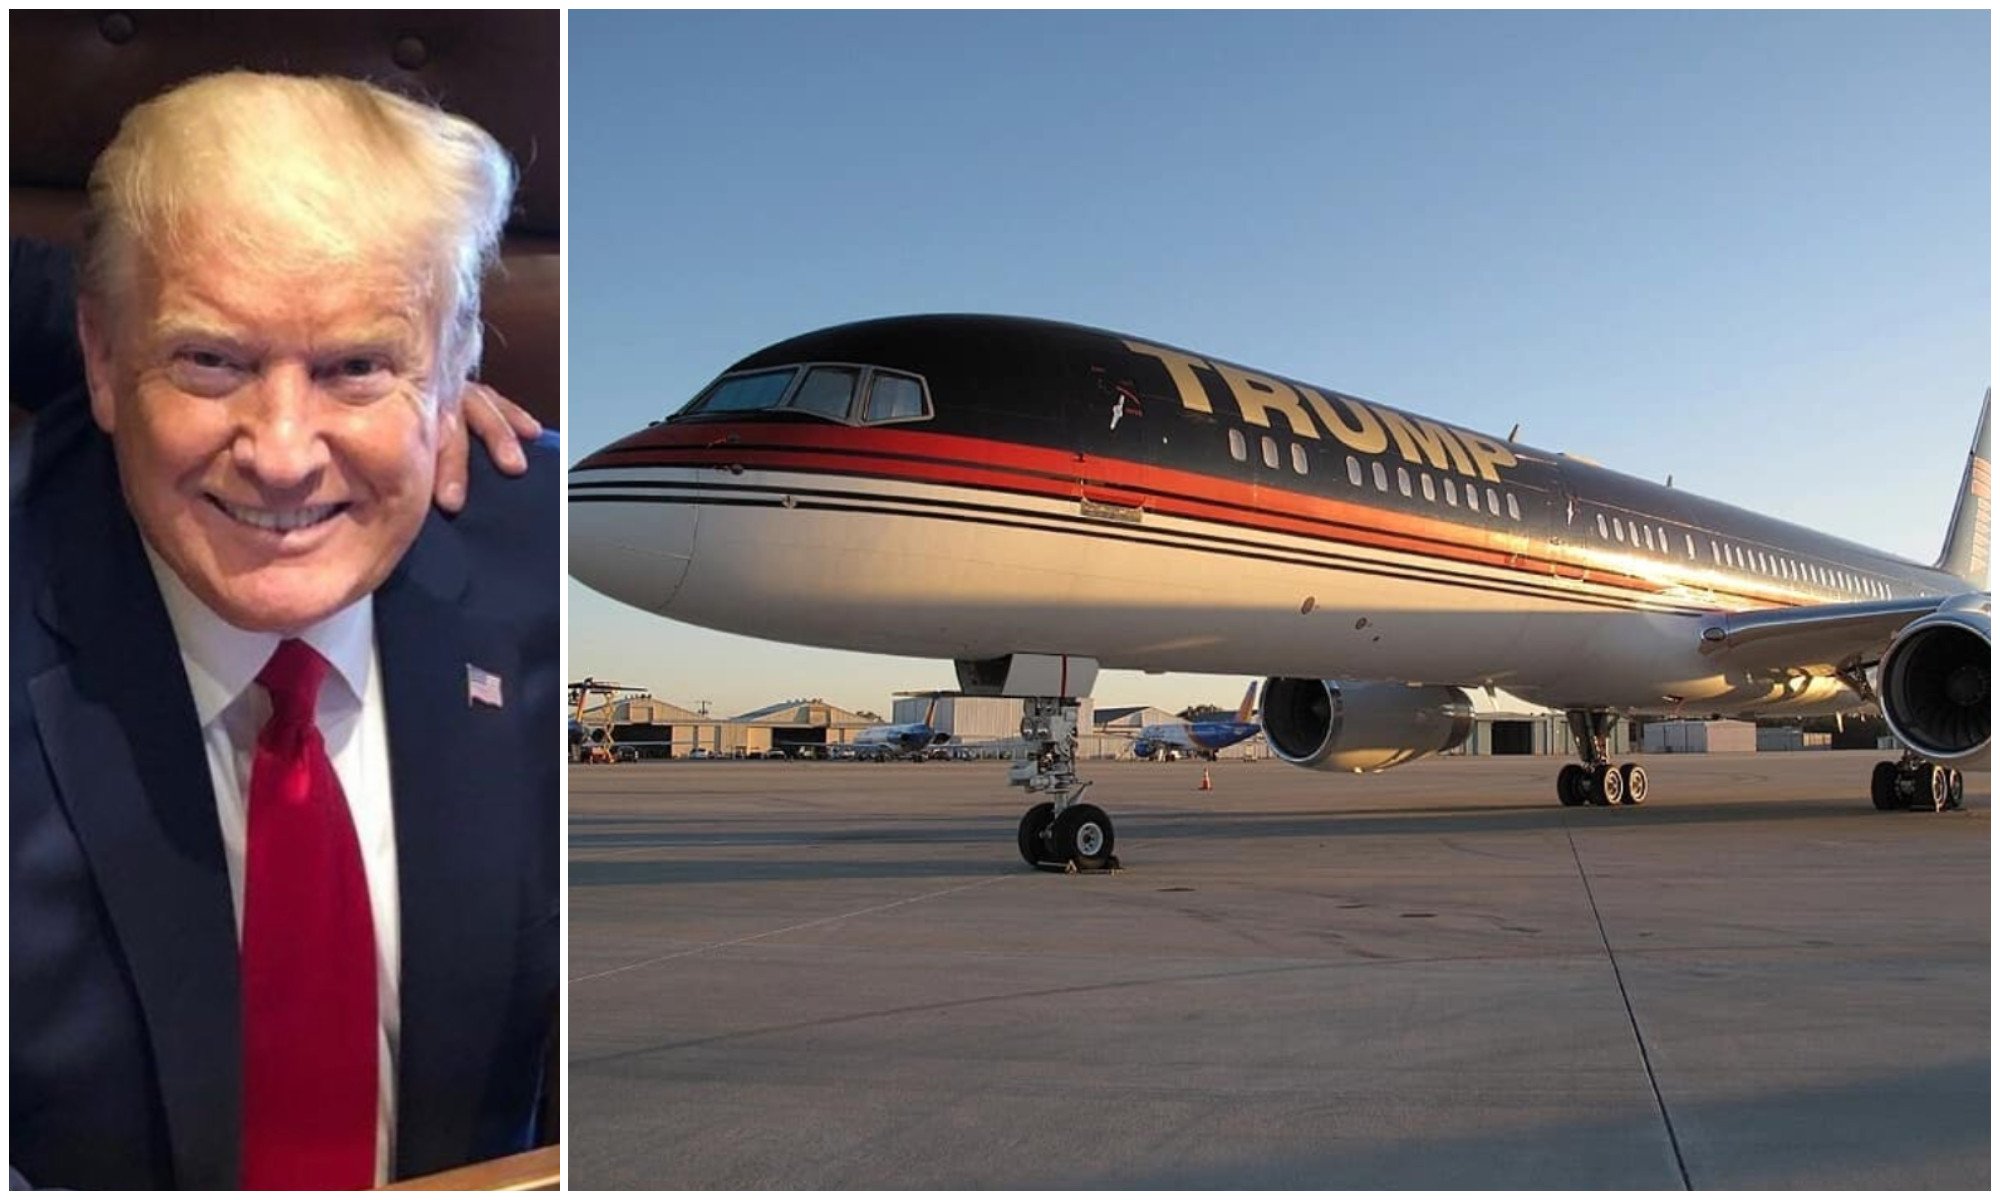 Donald Trump is known to enjoy fast food aboard his loud, proud private plane. Photos: @realdonaldtrump, @boeing7572j4/Instagram